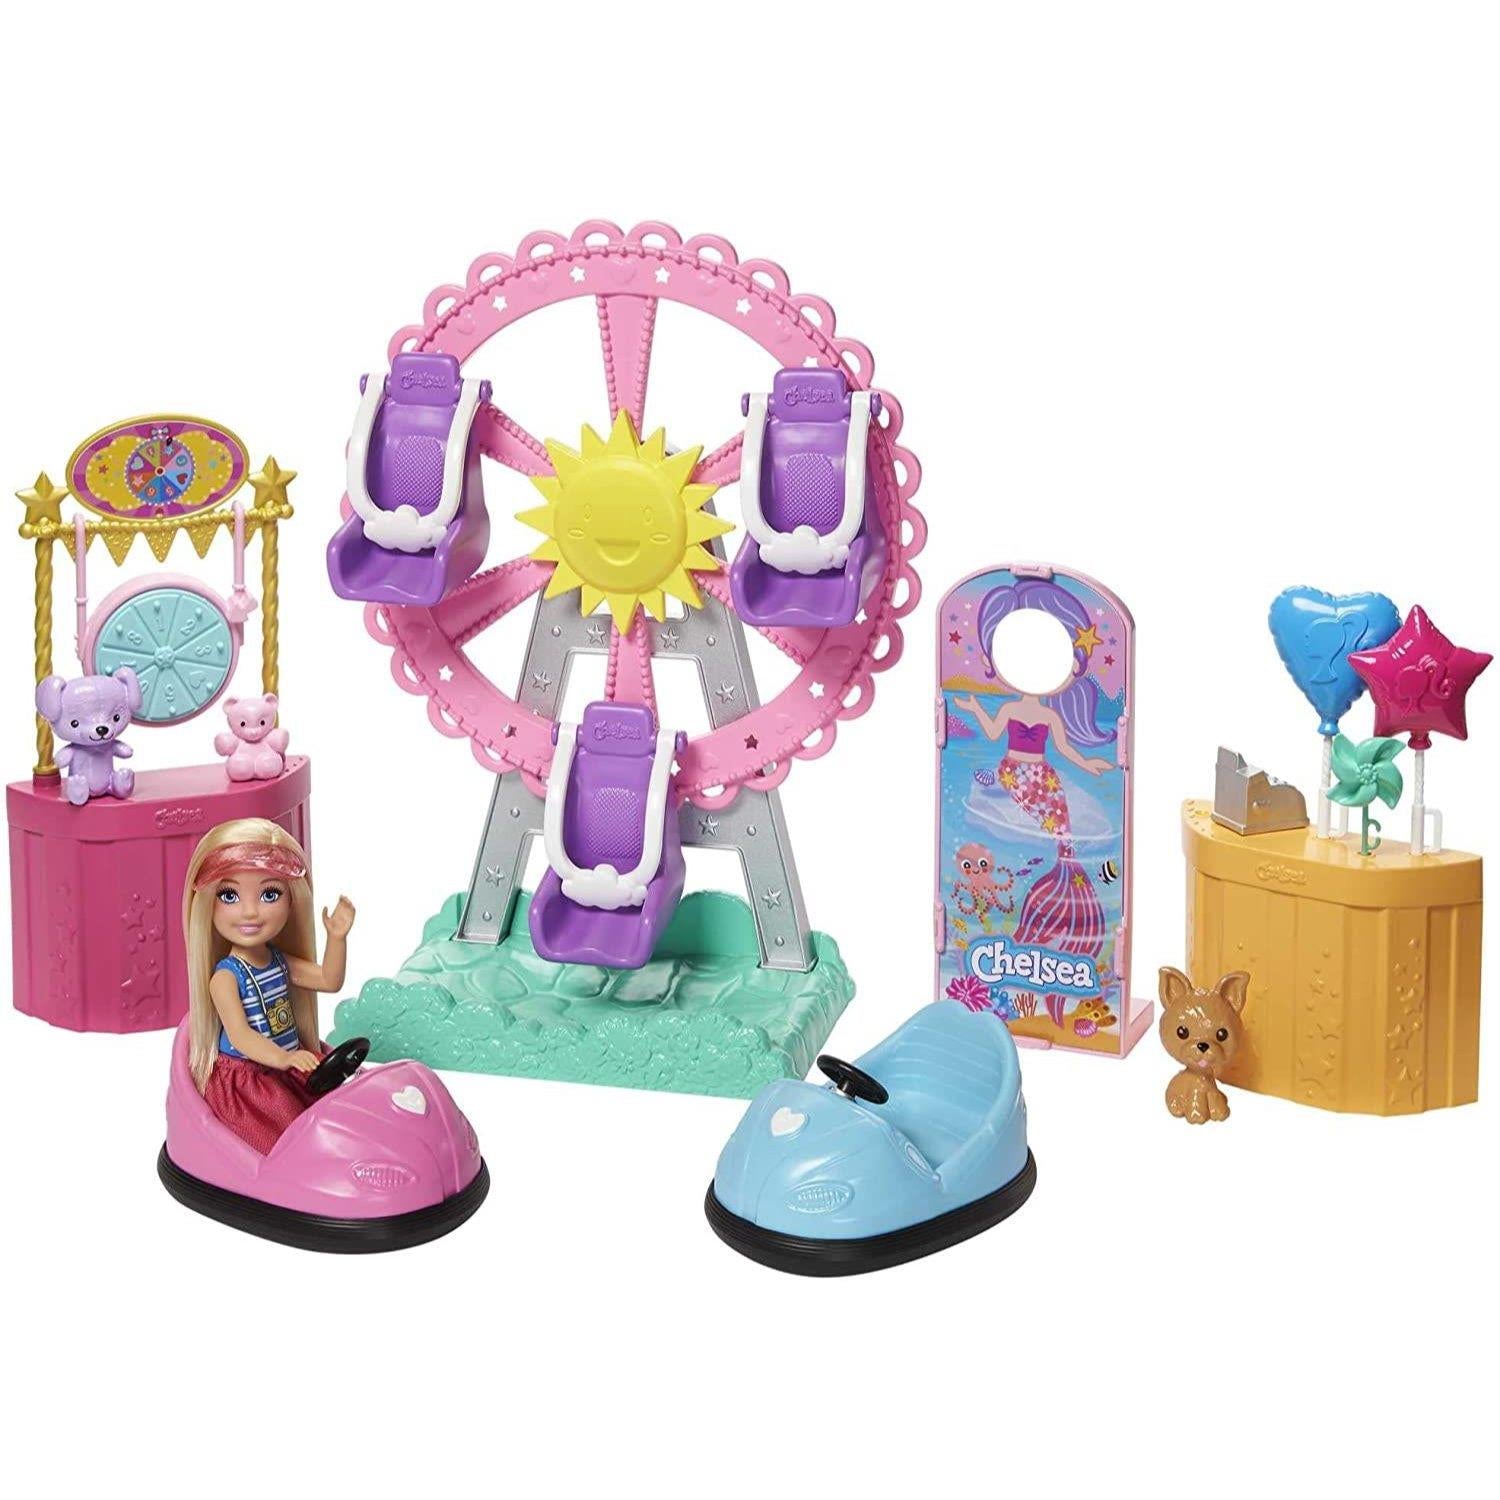 Barbie Doll Barbie Club Chelsea Doll and Carnival Playset with 6-Inch Fashion Doll